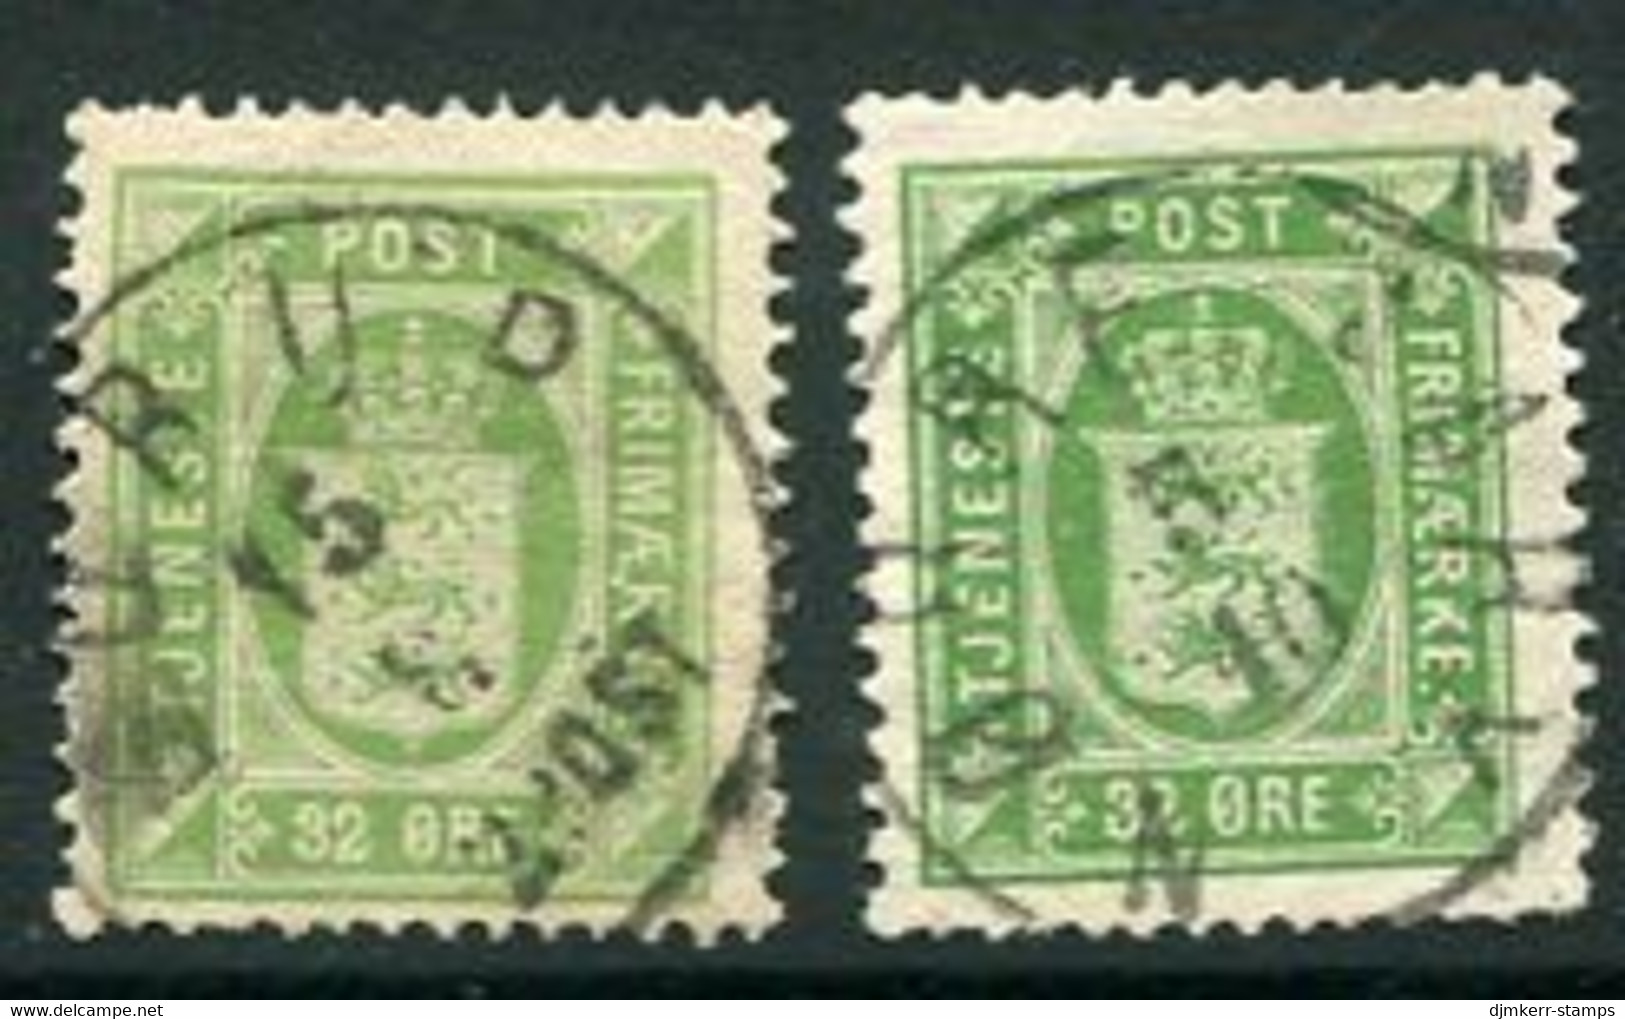 DENMARK 1875 Official 32 Øre Perforated 14 X 13½ Yellow-green And Green, Used.  SG O97-98 Cat. £109. - Oficiales